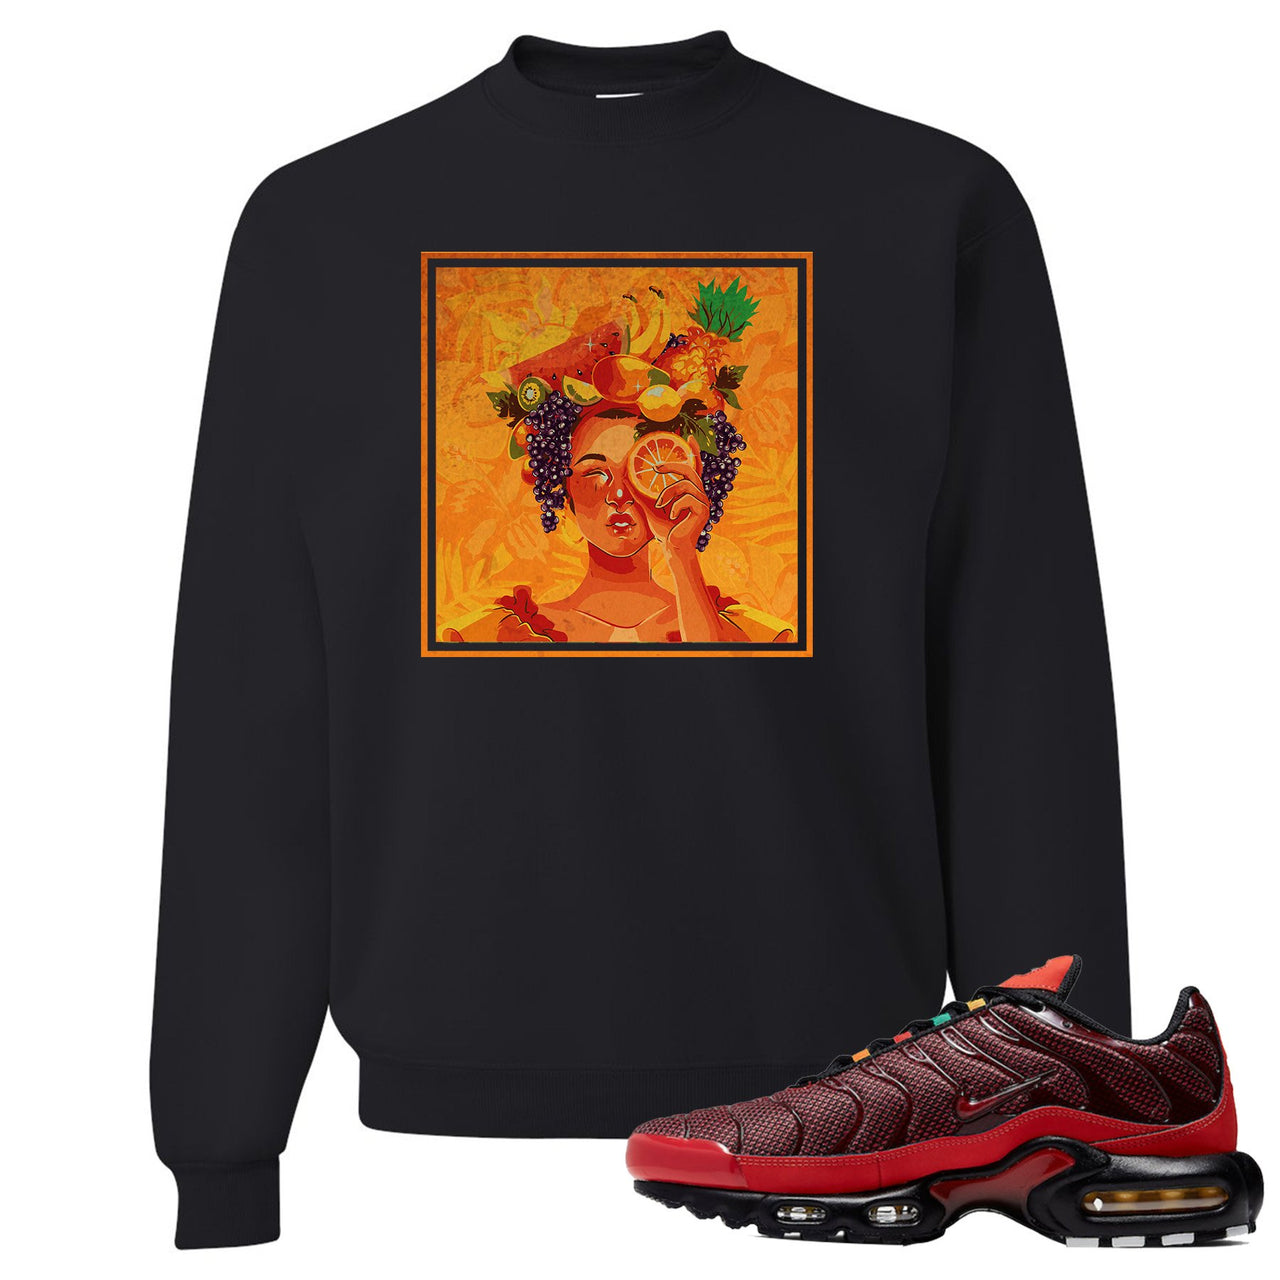 Printed on the front of the Air Max PLus sunburst sneaker matching black crewneck sweatshirt is the Lady Fruit logo